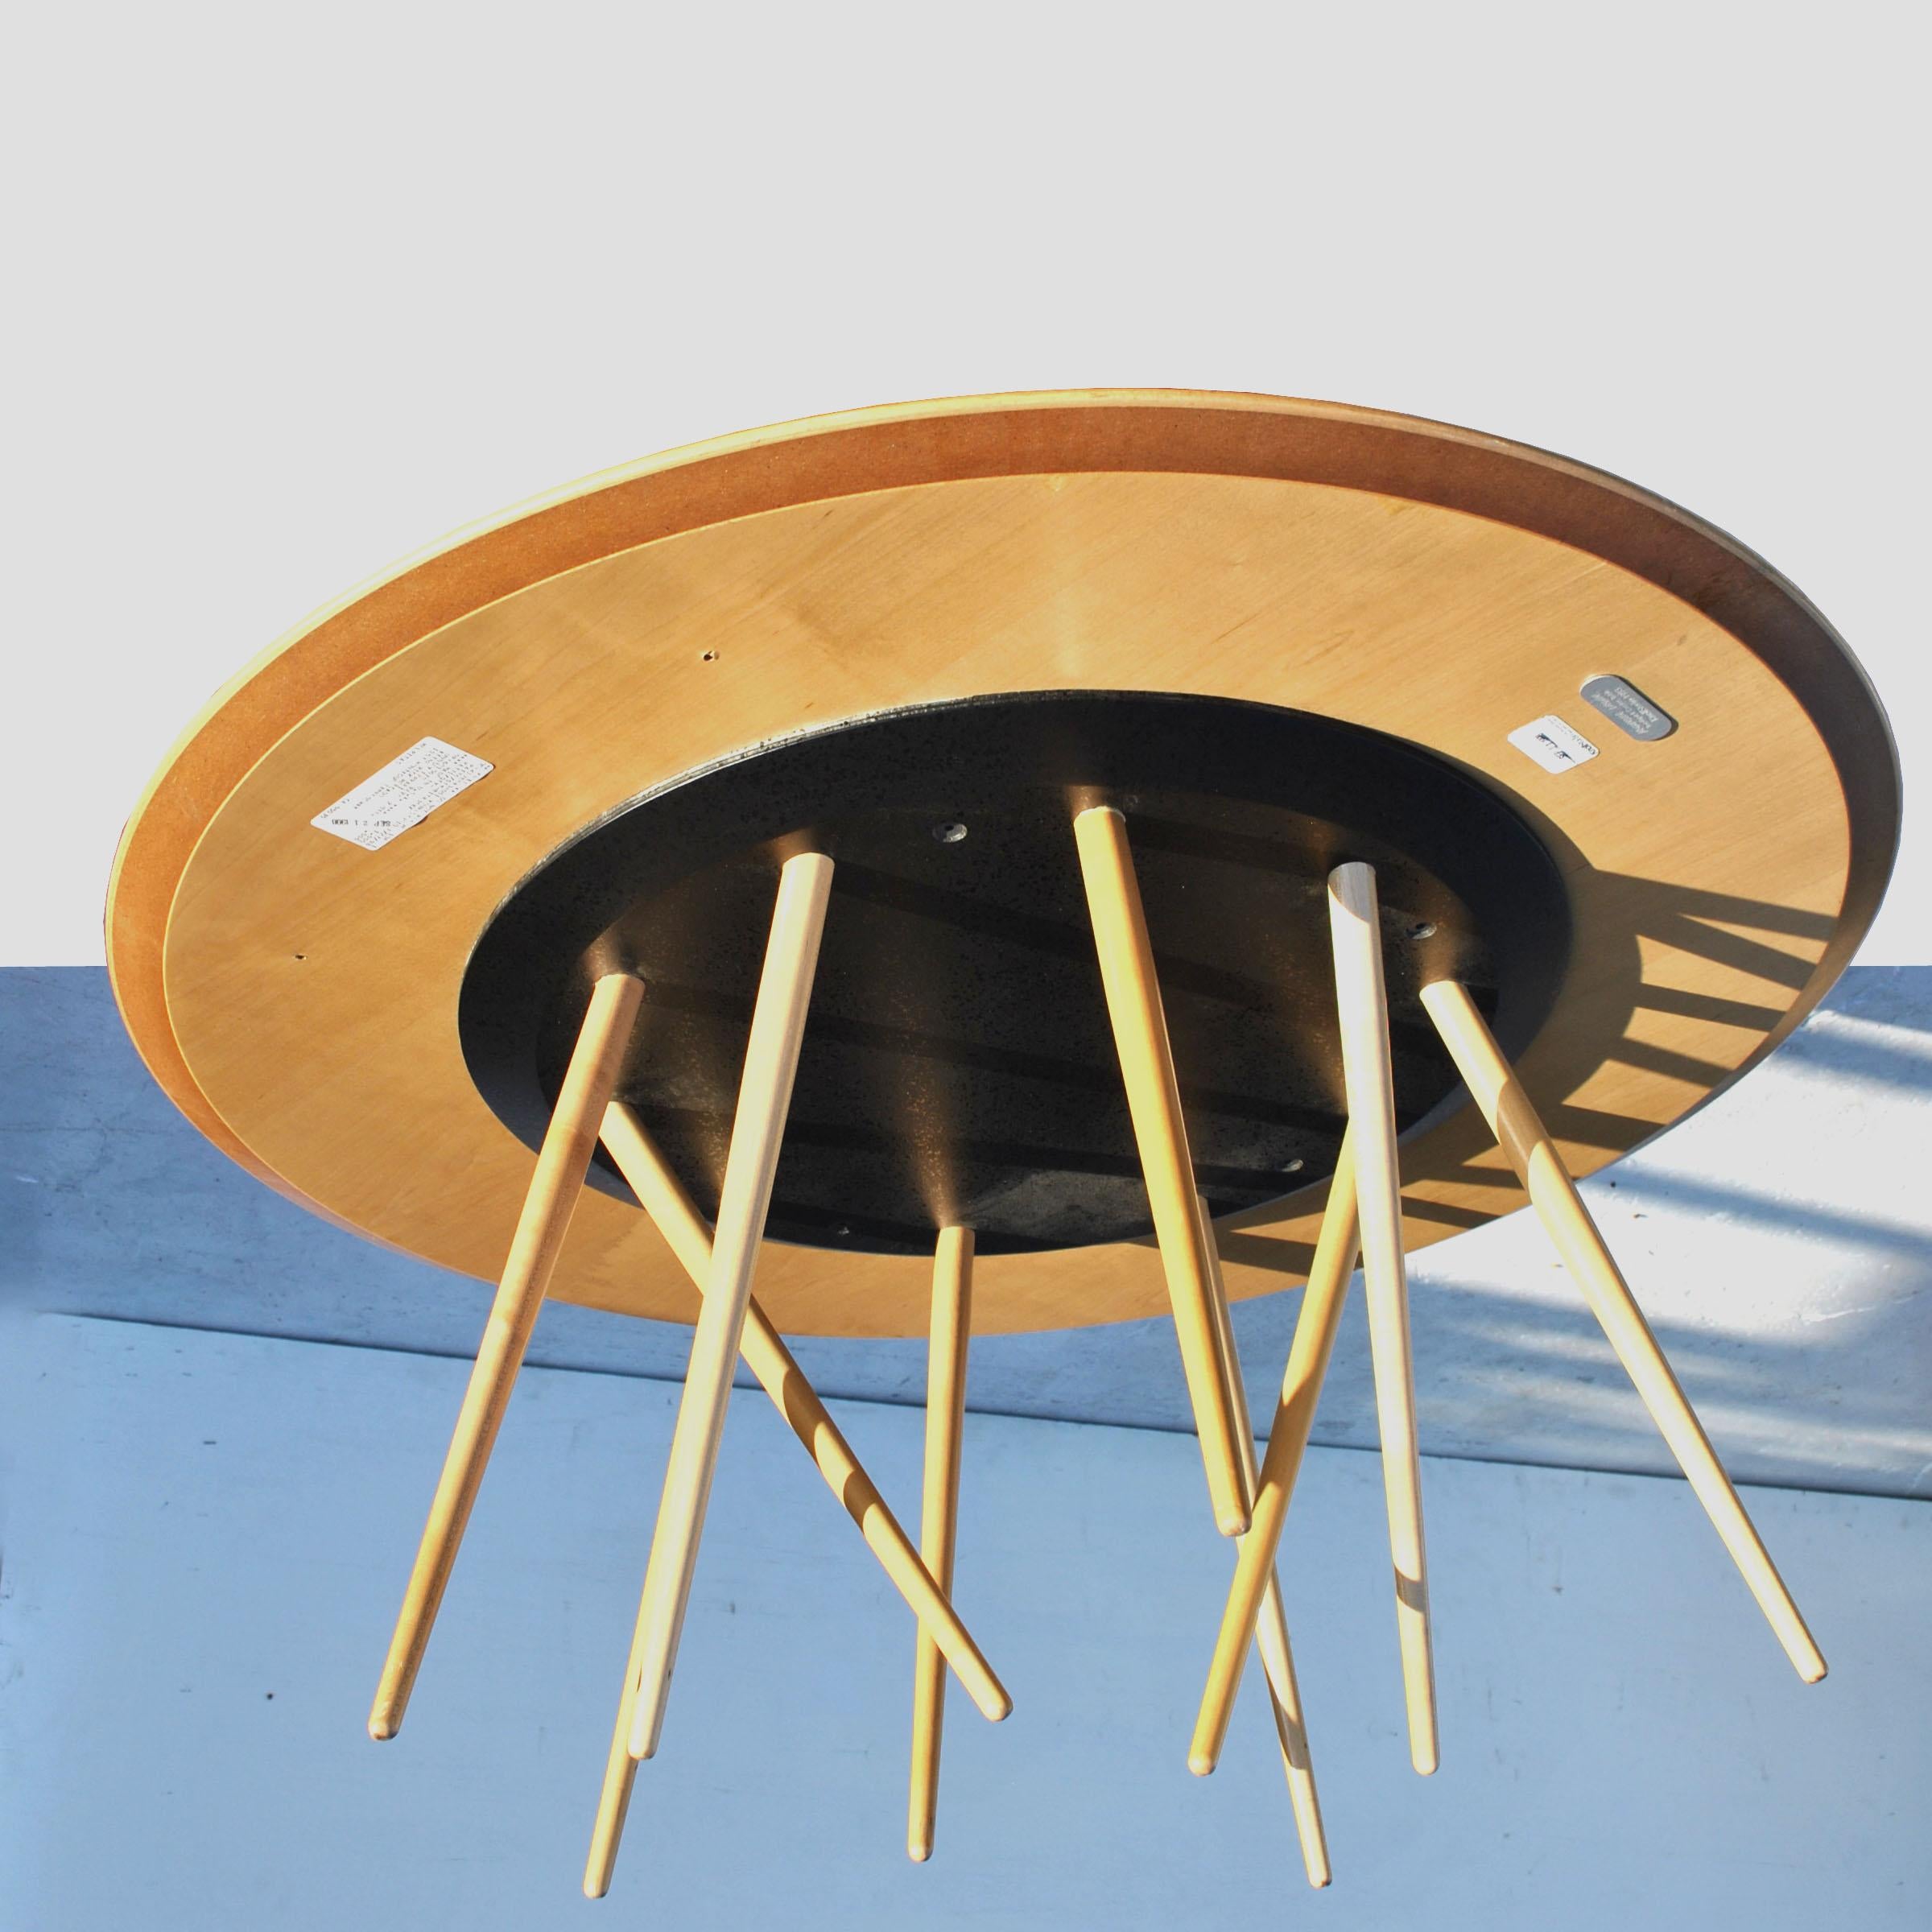 American Round Toothpick Cactus Table by Lawrence Laske for Knoll For Sale